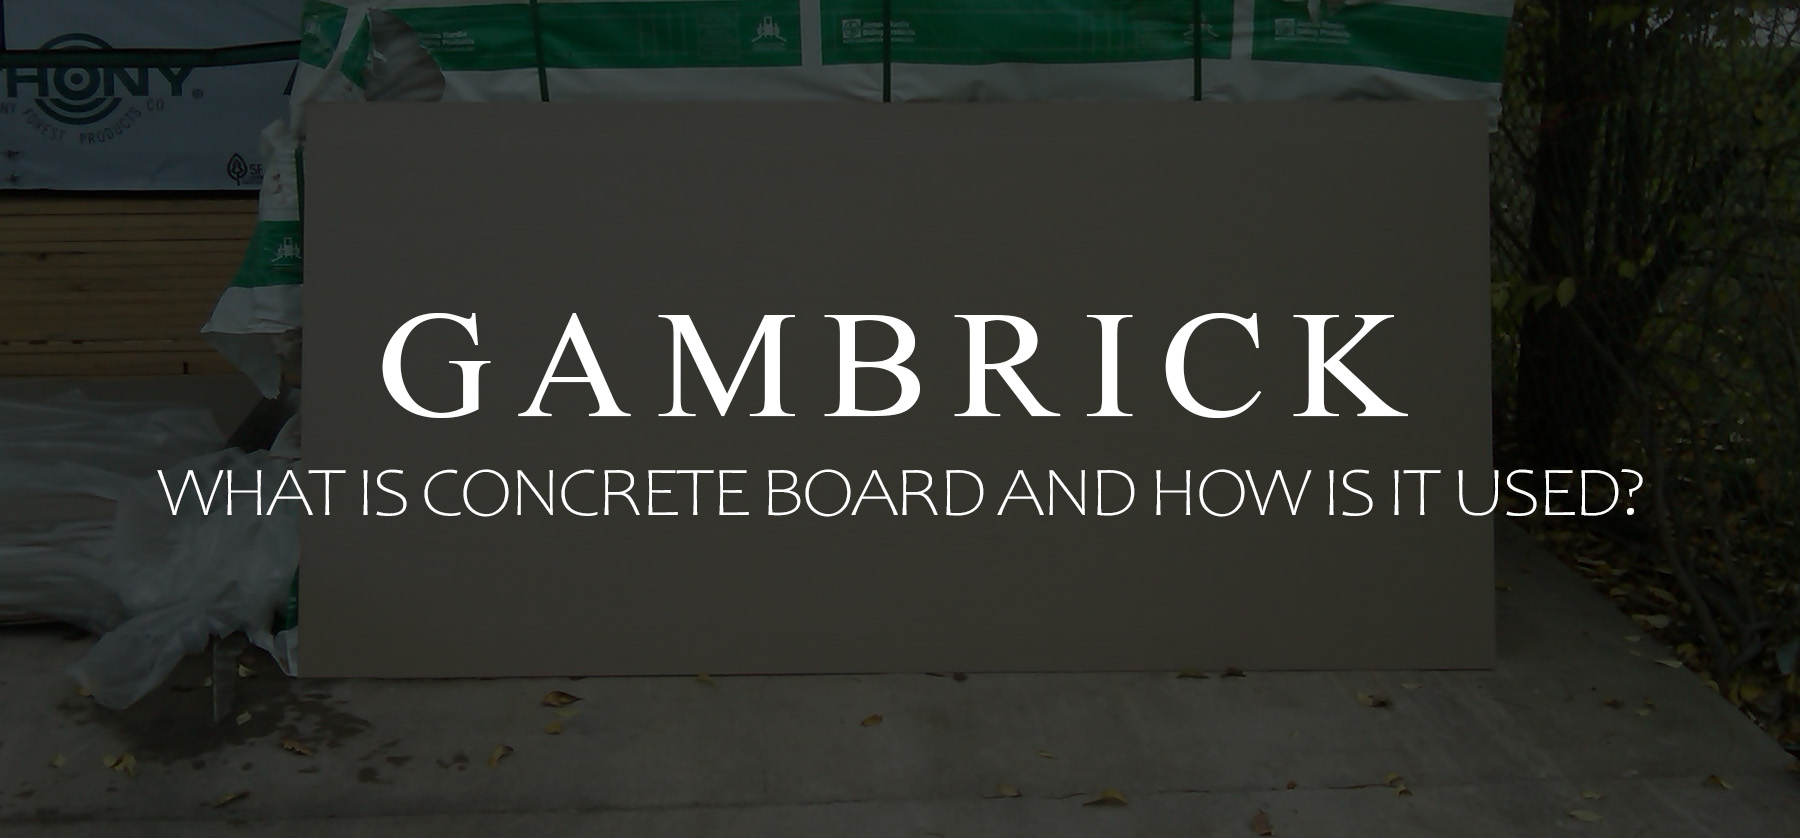 what is concrete board and how is it used banner pic